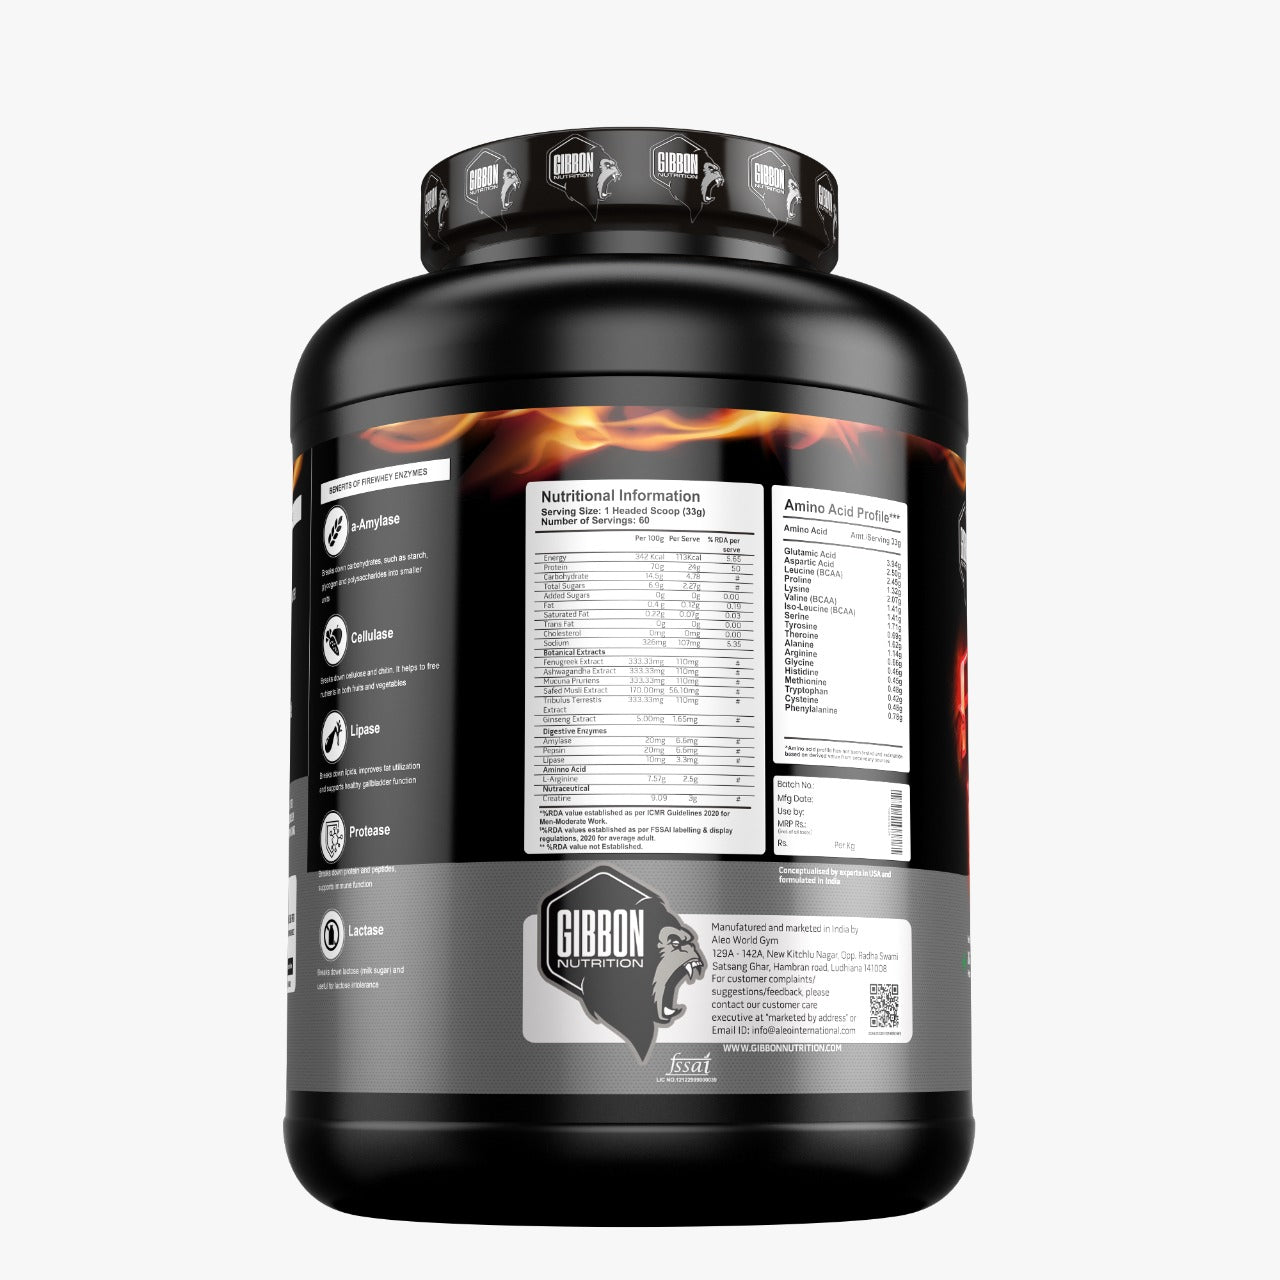 Gibbon Nutrition Fire Whey Protein, 2kg, 60 servings - Gibbon Nutrition -